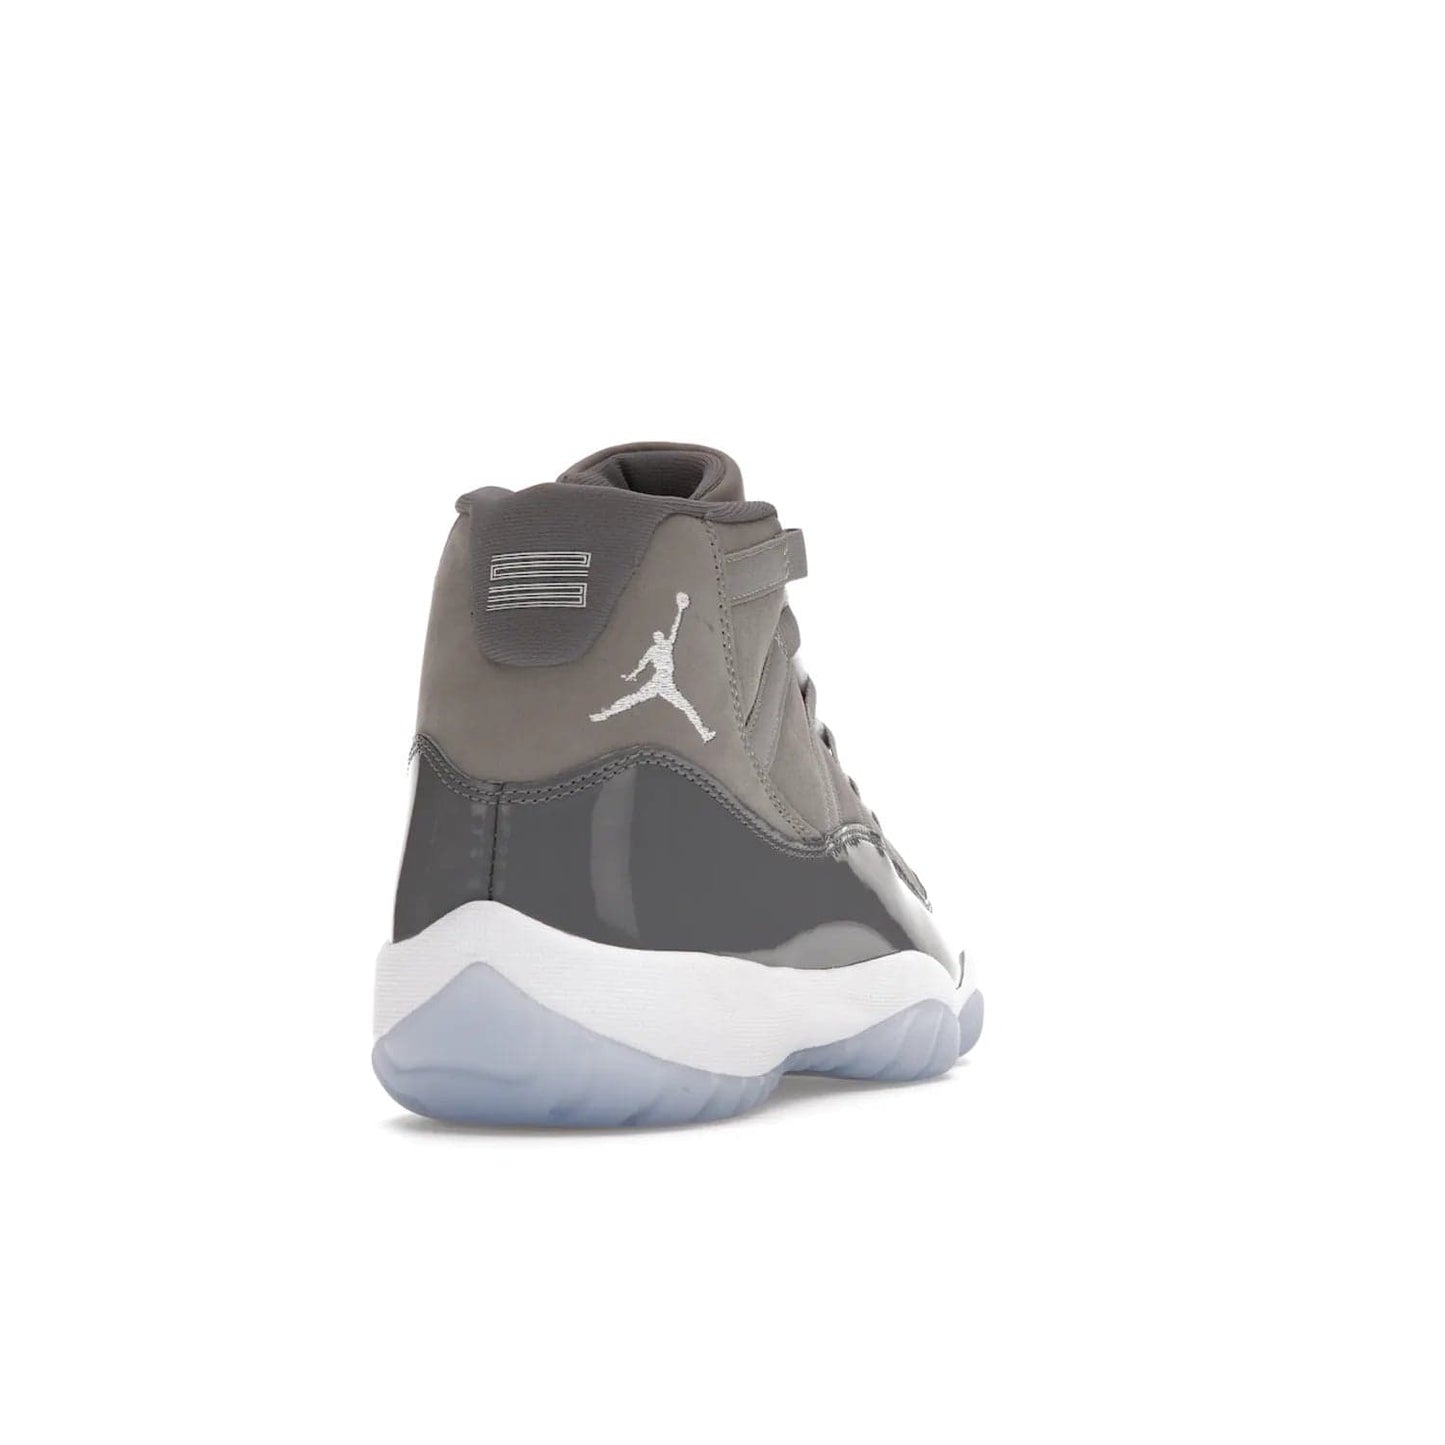 Jordan 11 Retro Cool Grey (2021) - Image 30 - Only at www.BallersClubKickz.com - Shop the Air Jordan 11 Retro Cool Grey (2021) for a must-have sneaker with a Cool Grey Durabuck upper, patent leather overlays, signature Jumpman embroidery, a white midsole, icy blue translucent outsole, and Multi-Color accents.  Released in December 2021 for $225.